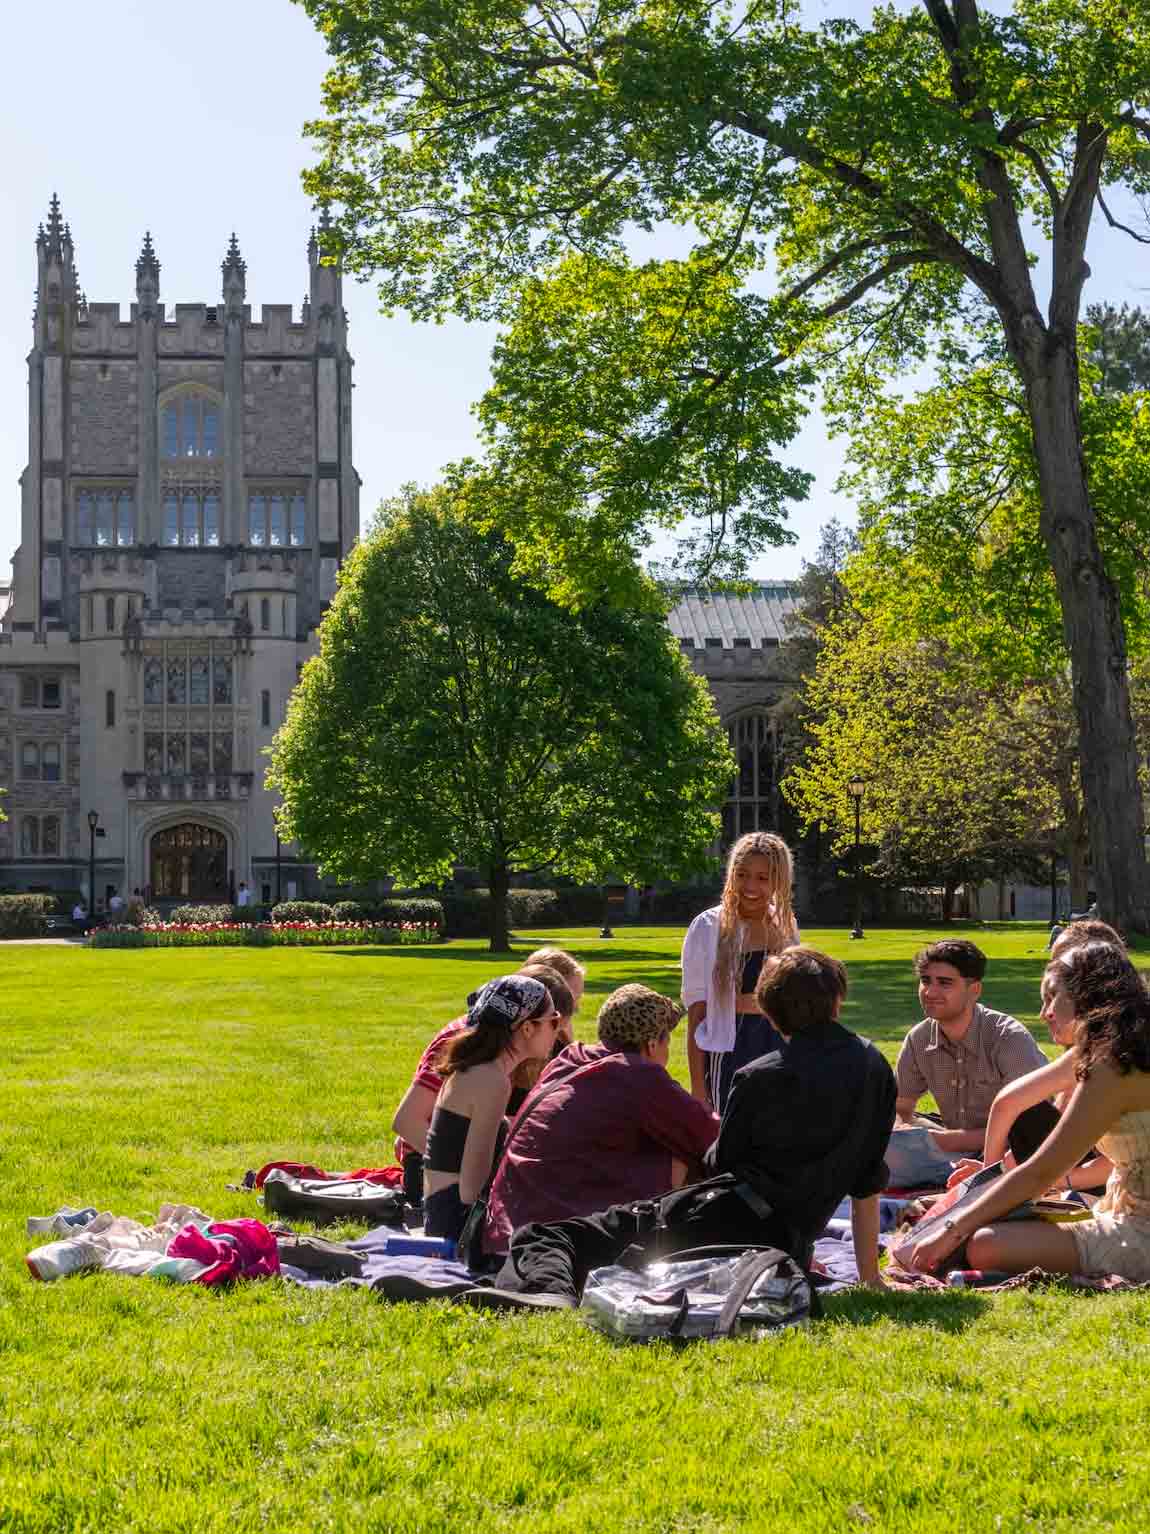 Students gather on the lawn in front of the library on a sunny day